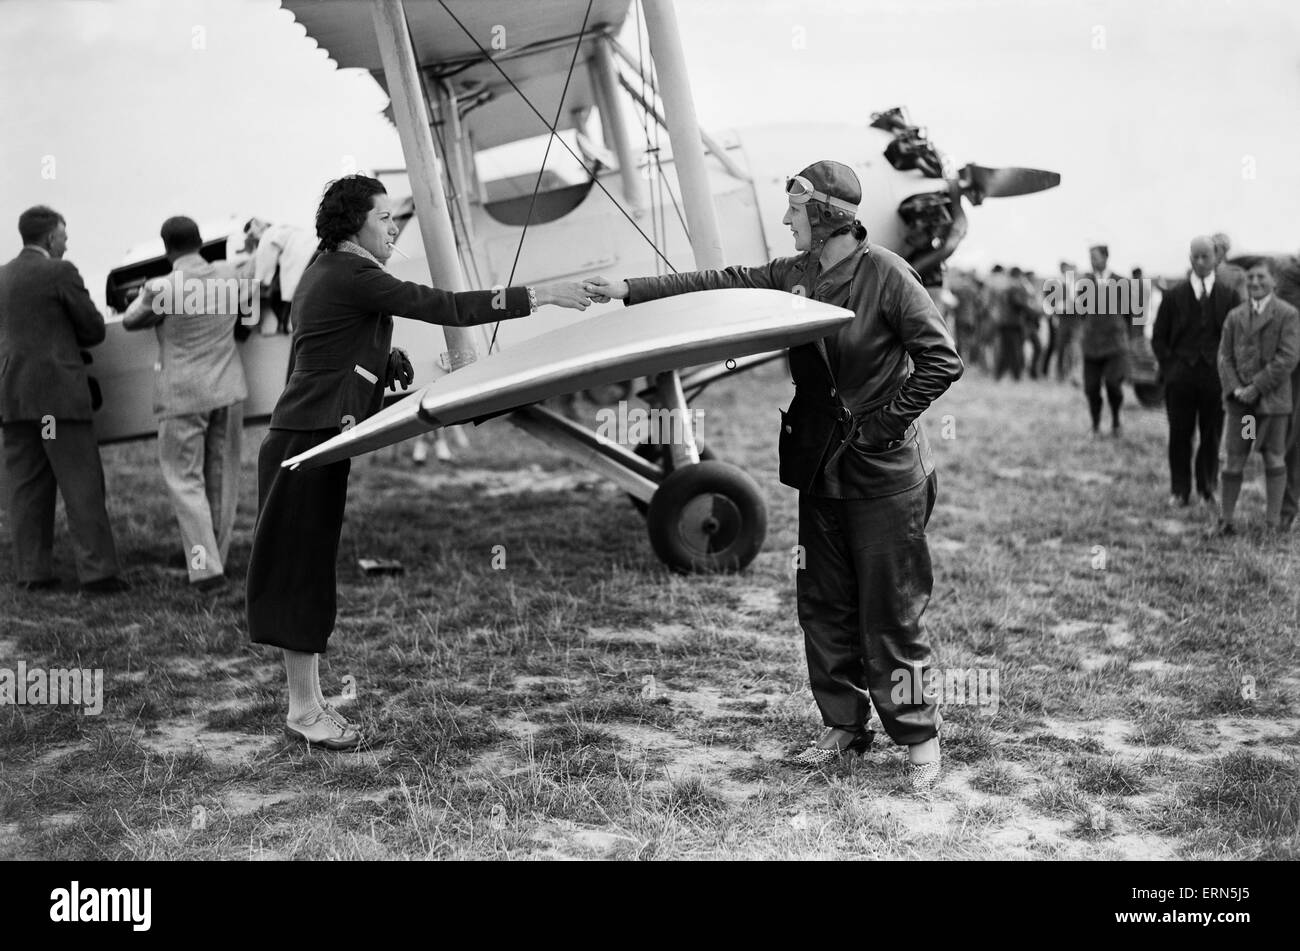 Pilots from 16 countries gather at Heston Aerodrome 1st September 1932 Stock Photo